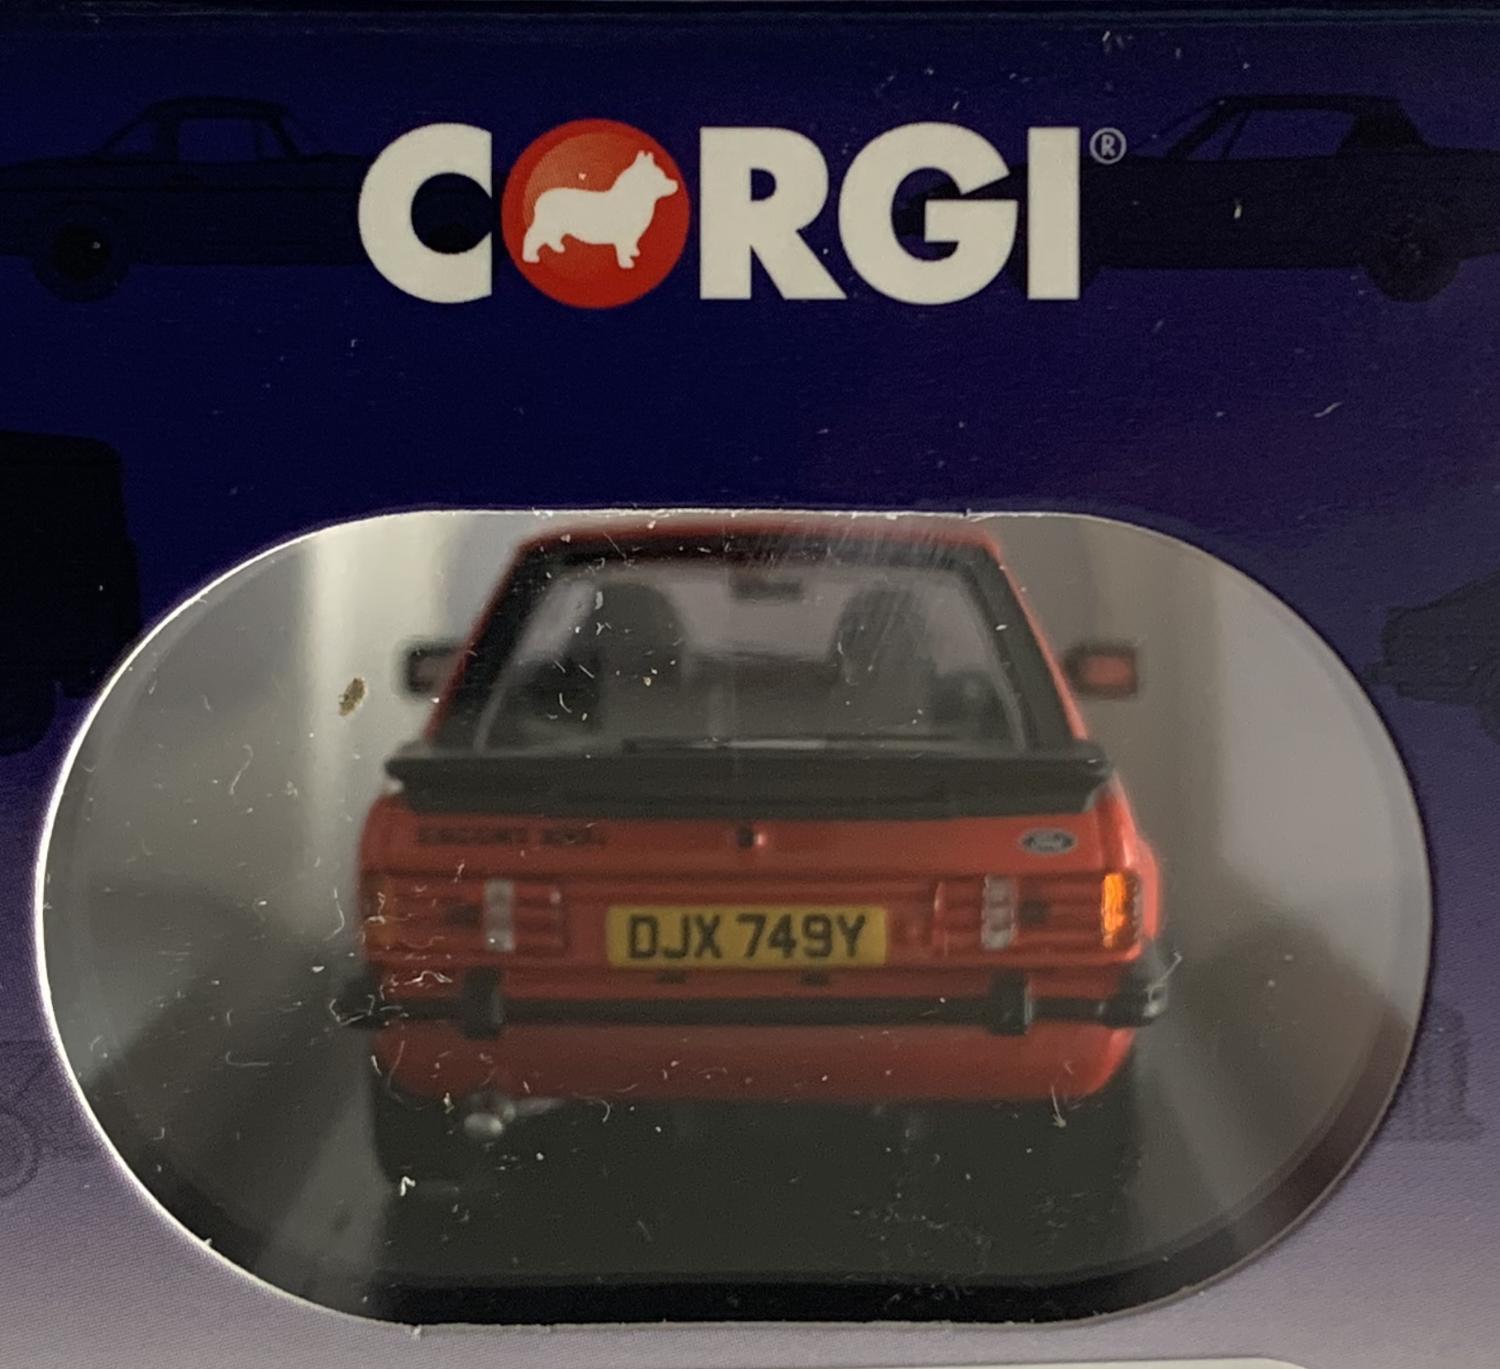 One of a Limited Edition of 1,000 pieces and includes a Limited Edition Collector Card.  Model presented in Corgi Vanguards packaging